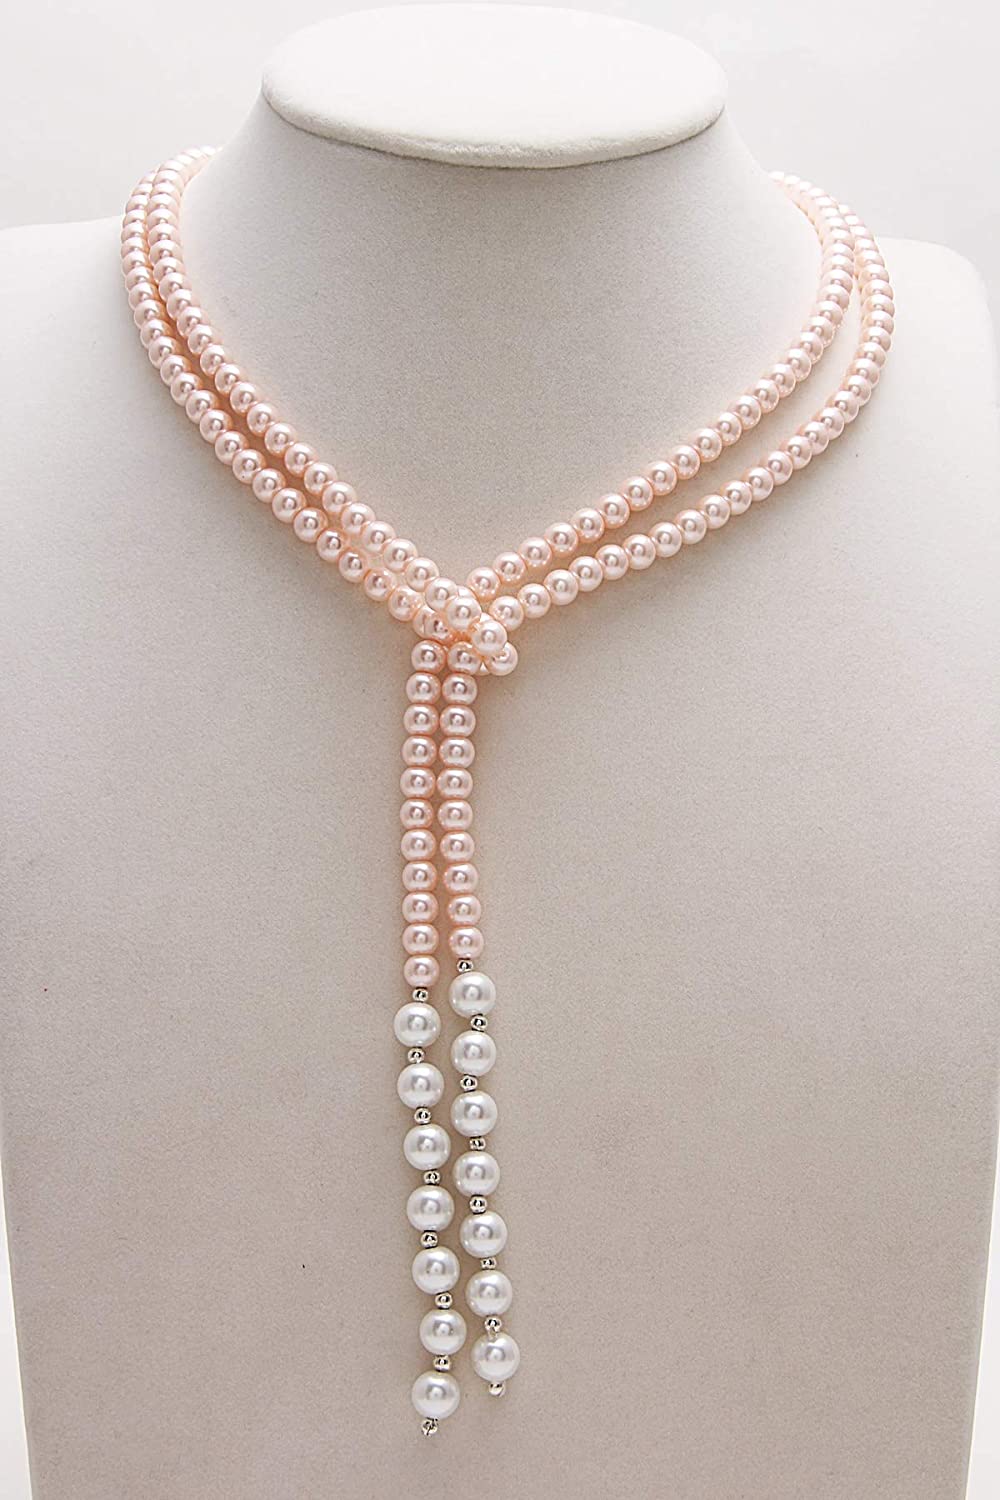 6MM Pastel Pink & 8MM White Shell Coated Pearls Long Fold & Wear Necklace